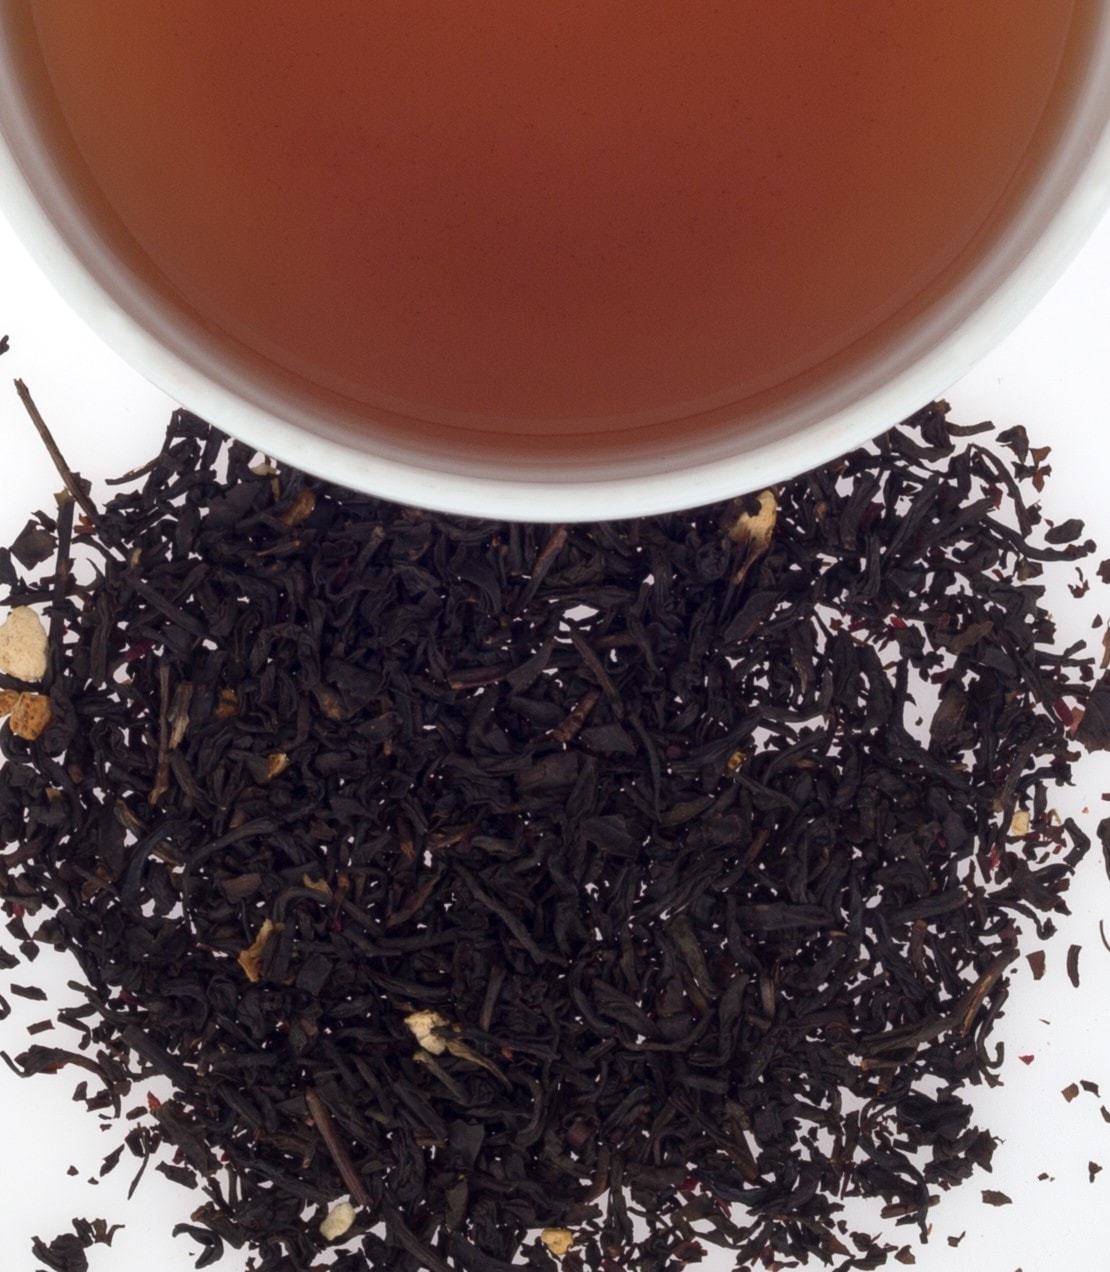 Cranberry Autumn - Black tea with cranberry and orange flavours - Harney & Sons Fine Teas Europe